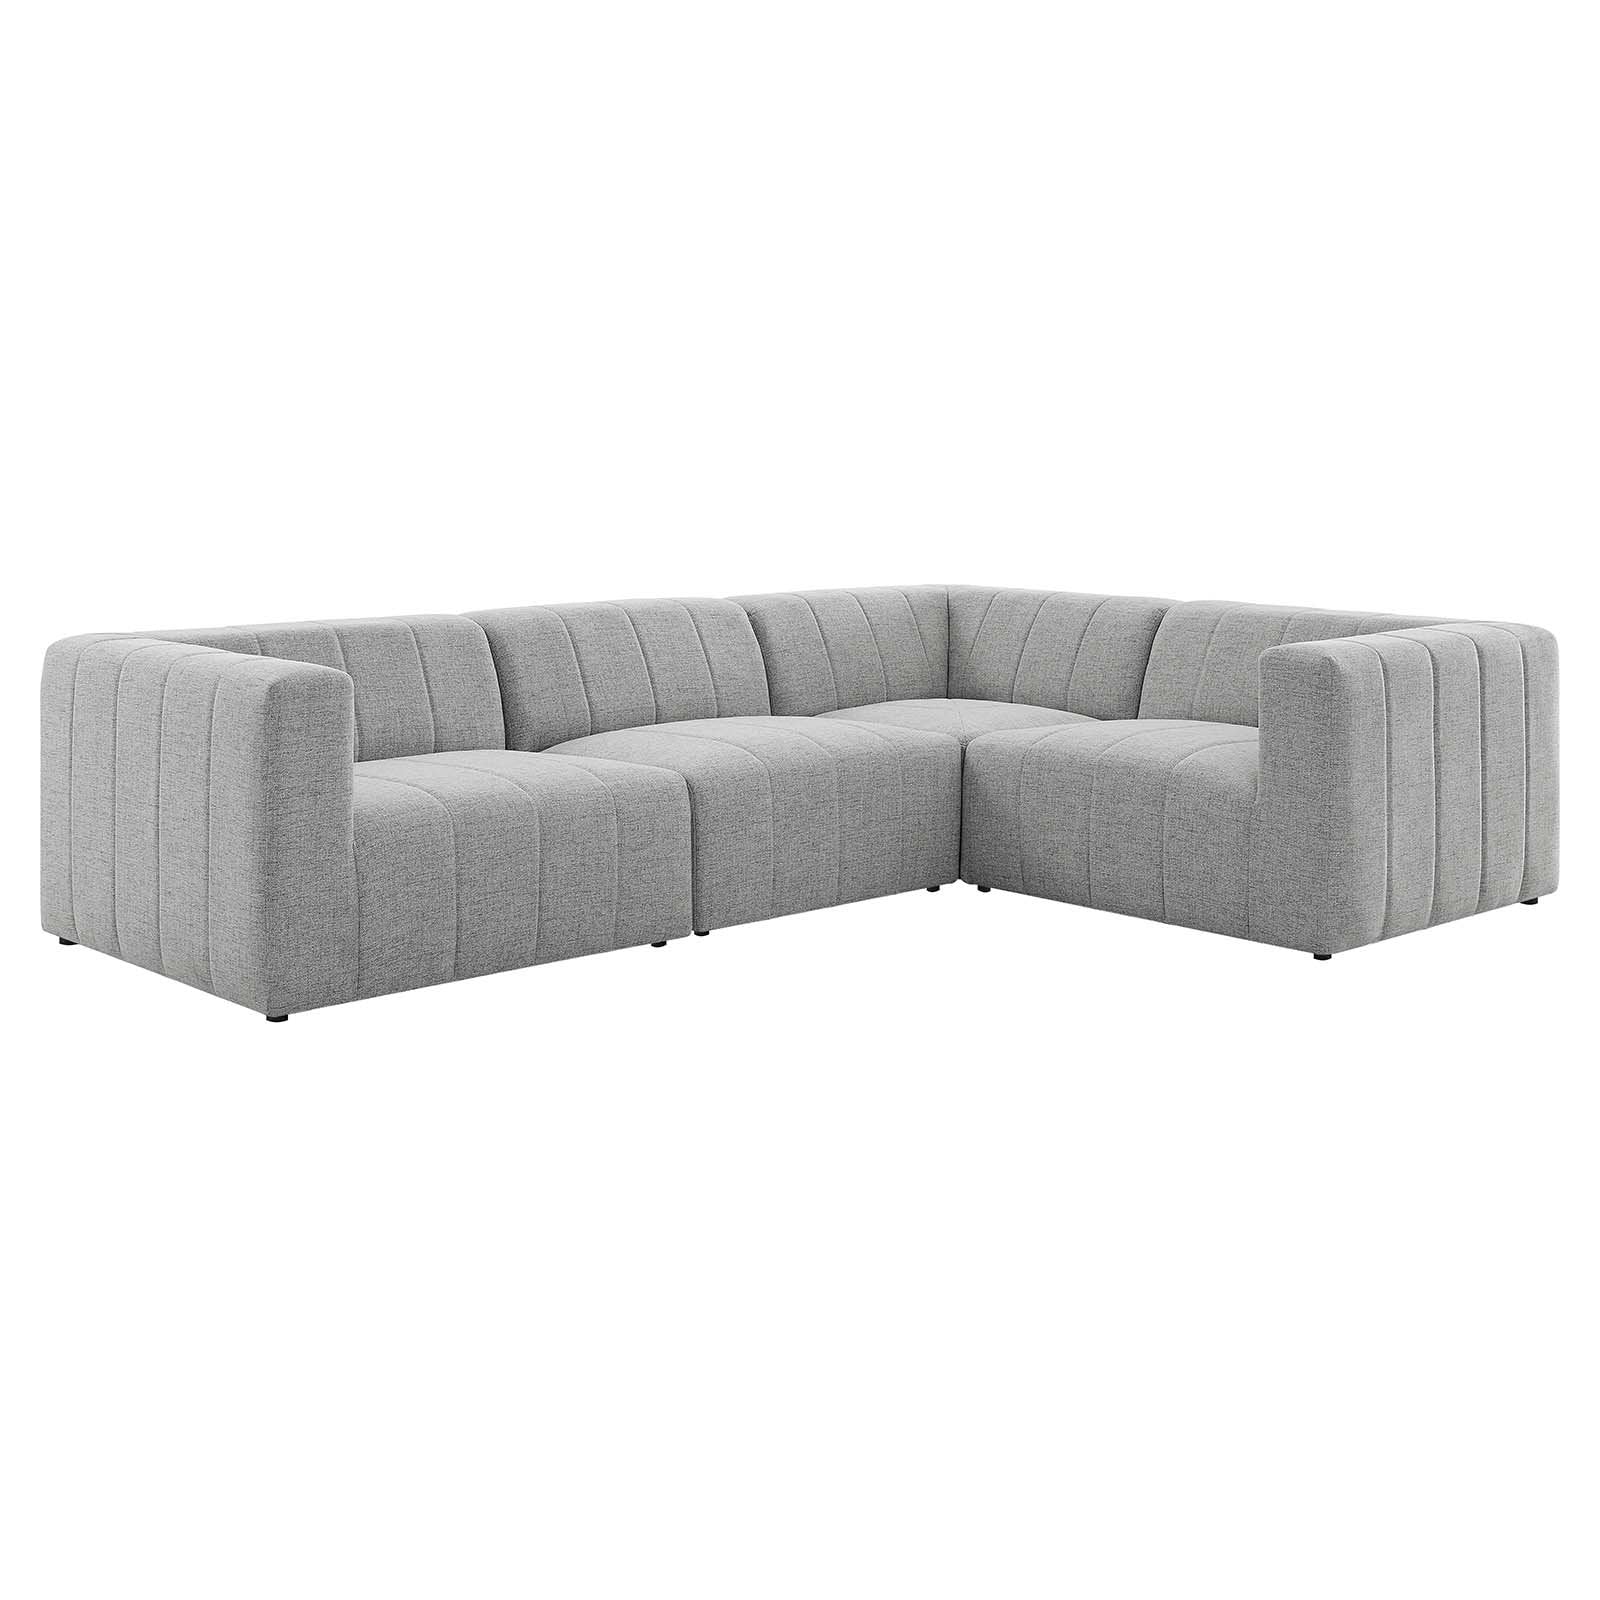 Bartlett Upholstered Fabric Upholstered Fabric 4-Piece Sectional Sofa - East Shore Modern Home Furnishings